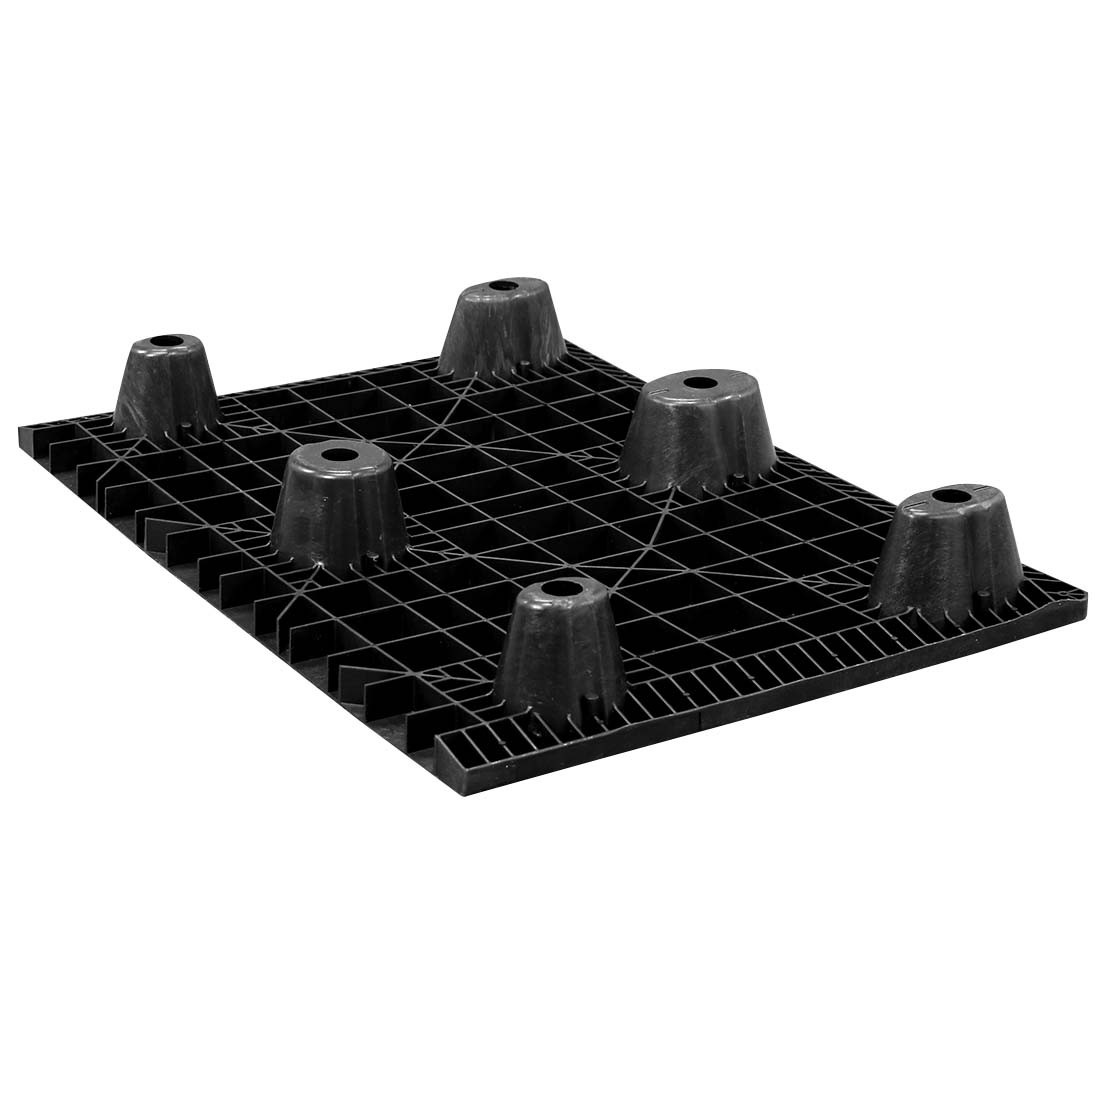 30 x 40 Nestable Solid Deck Plastic Pallet | One Way Solutions # PP-S ...